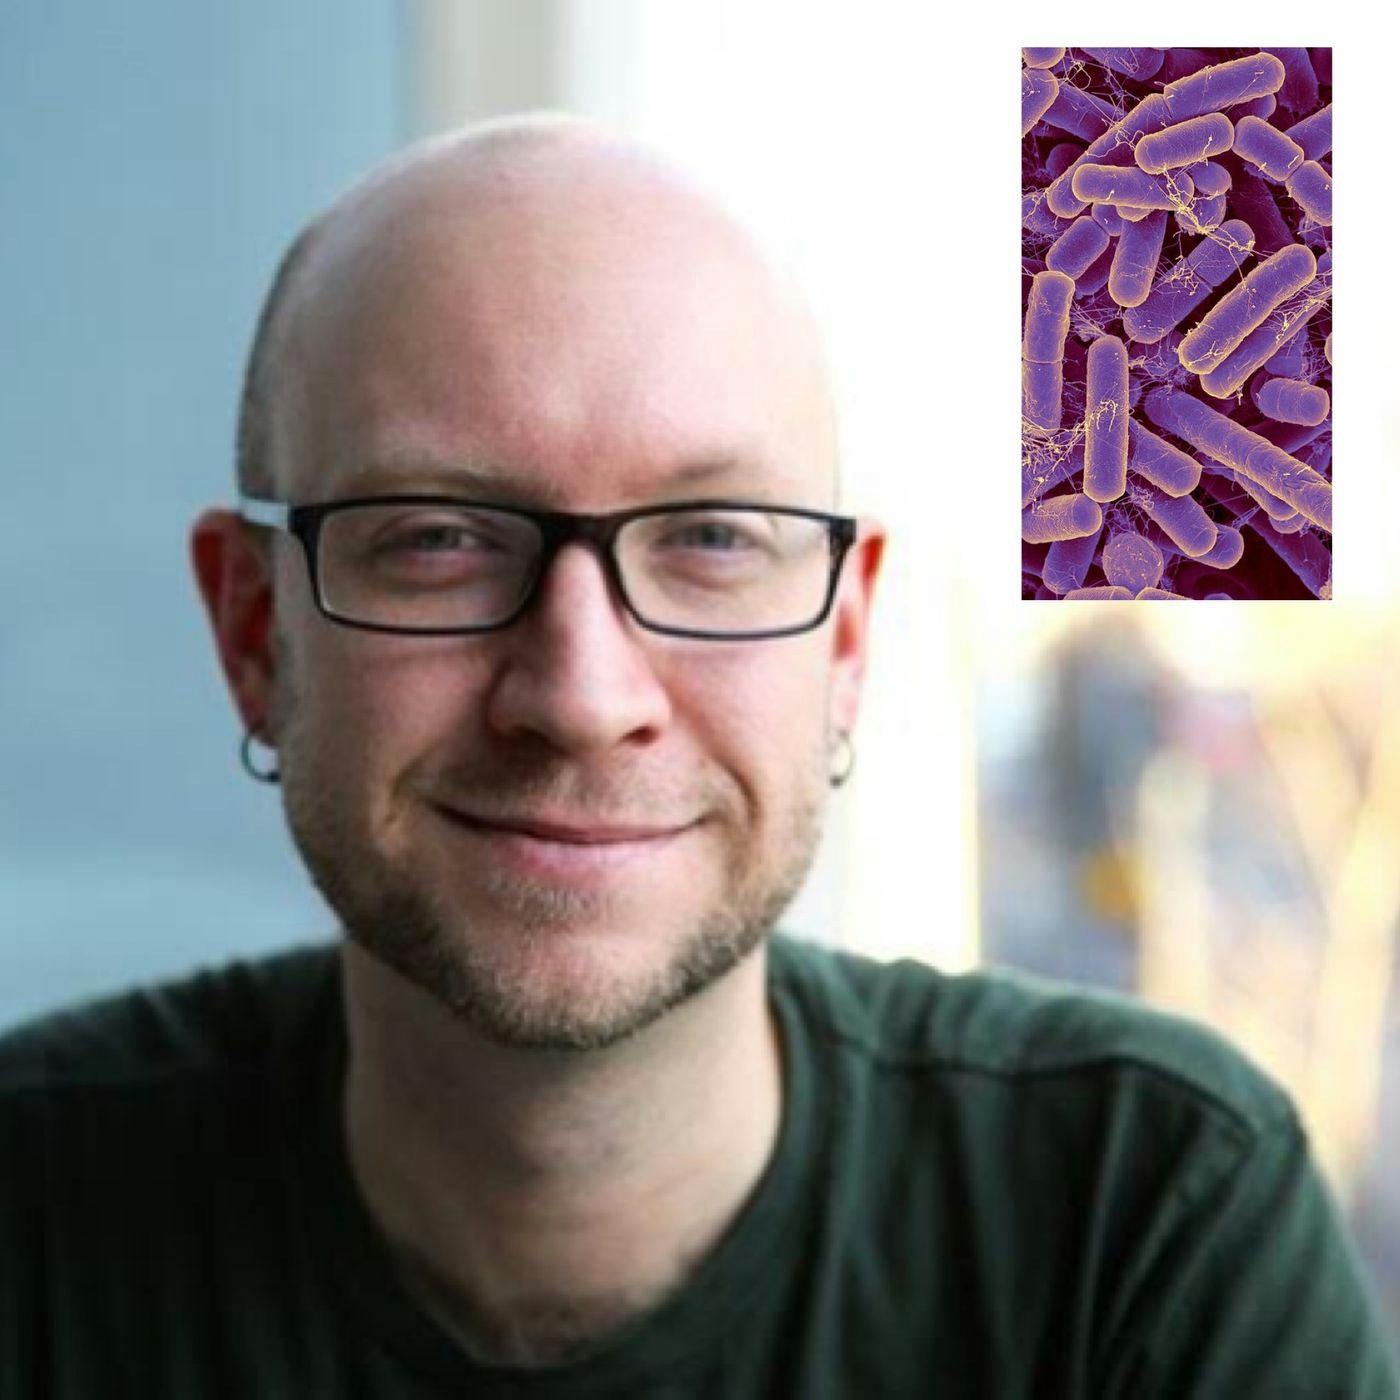 Microbial life with Daniel McDonald of the American Gut Project